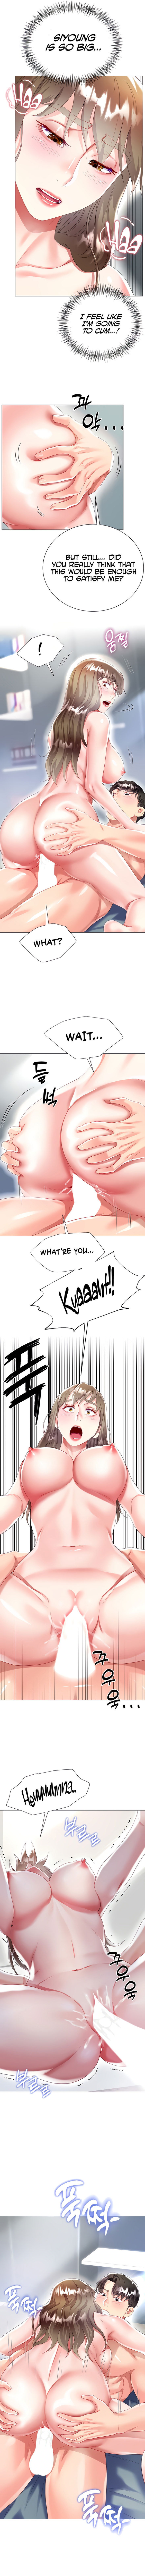 my-sister-in-laws-skirt-chap-32-5